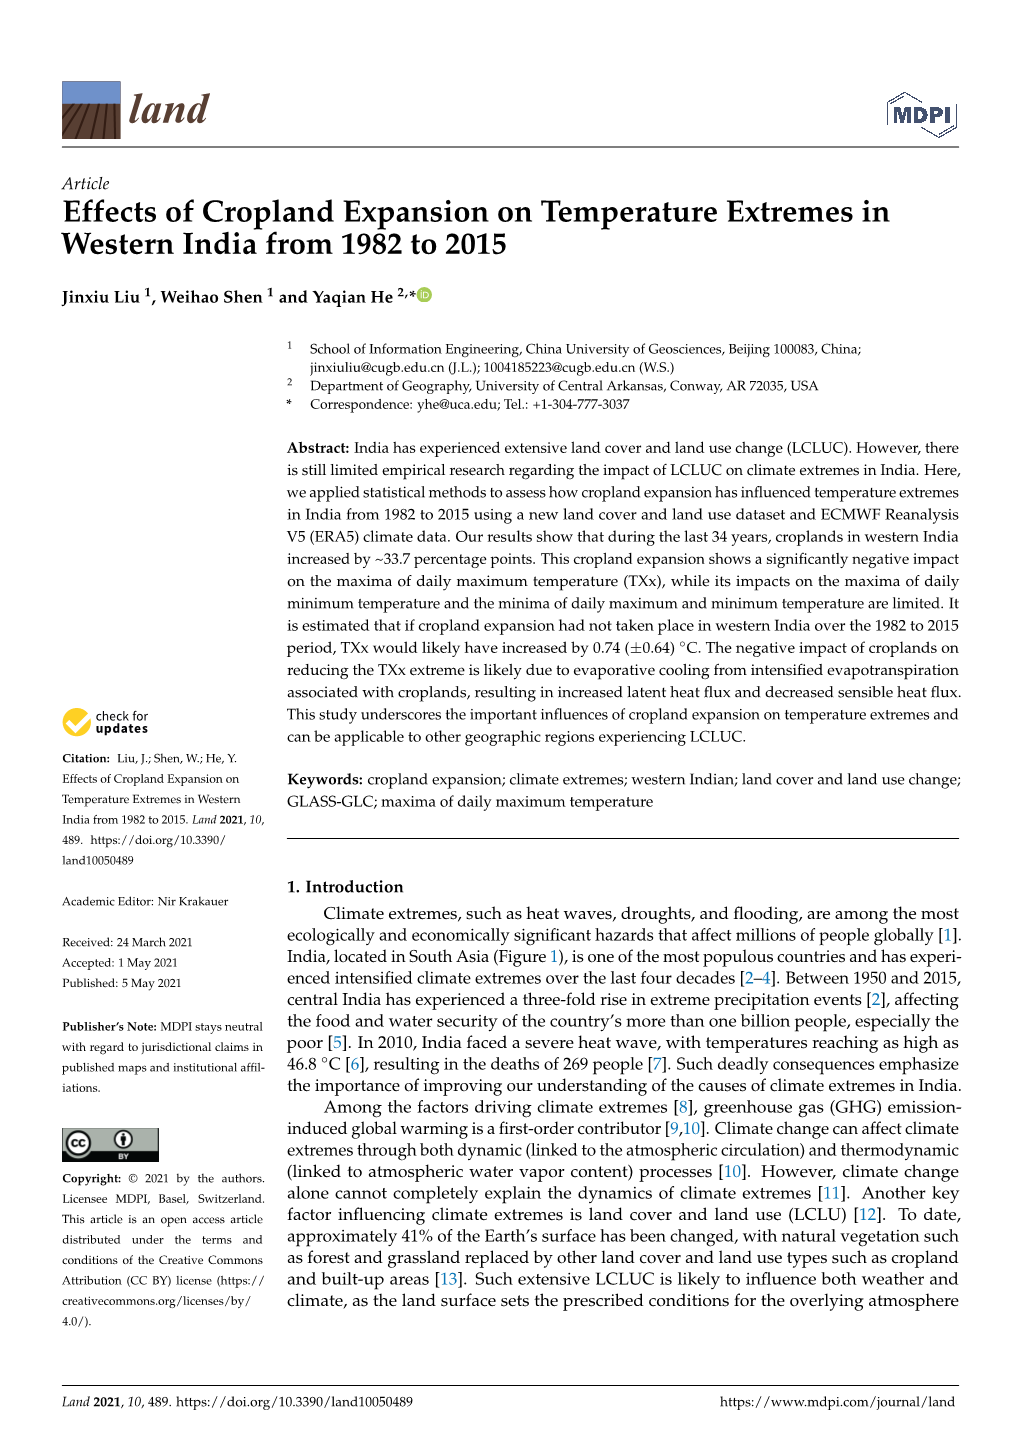 Effects of Cropland Expansion on Temperature Extremes in Western India from 1982 to 2015